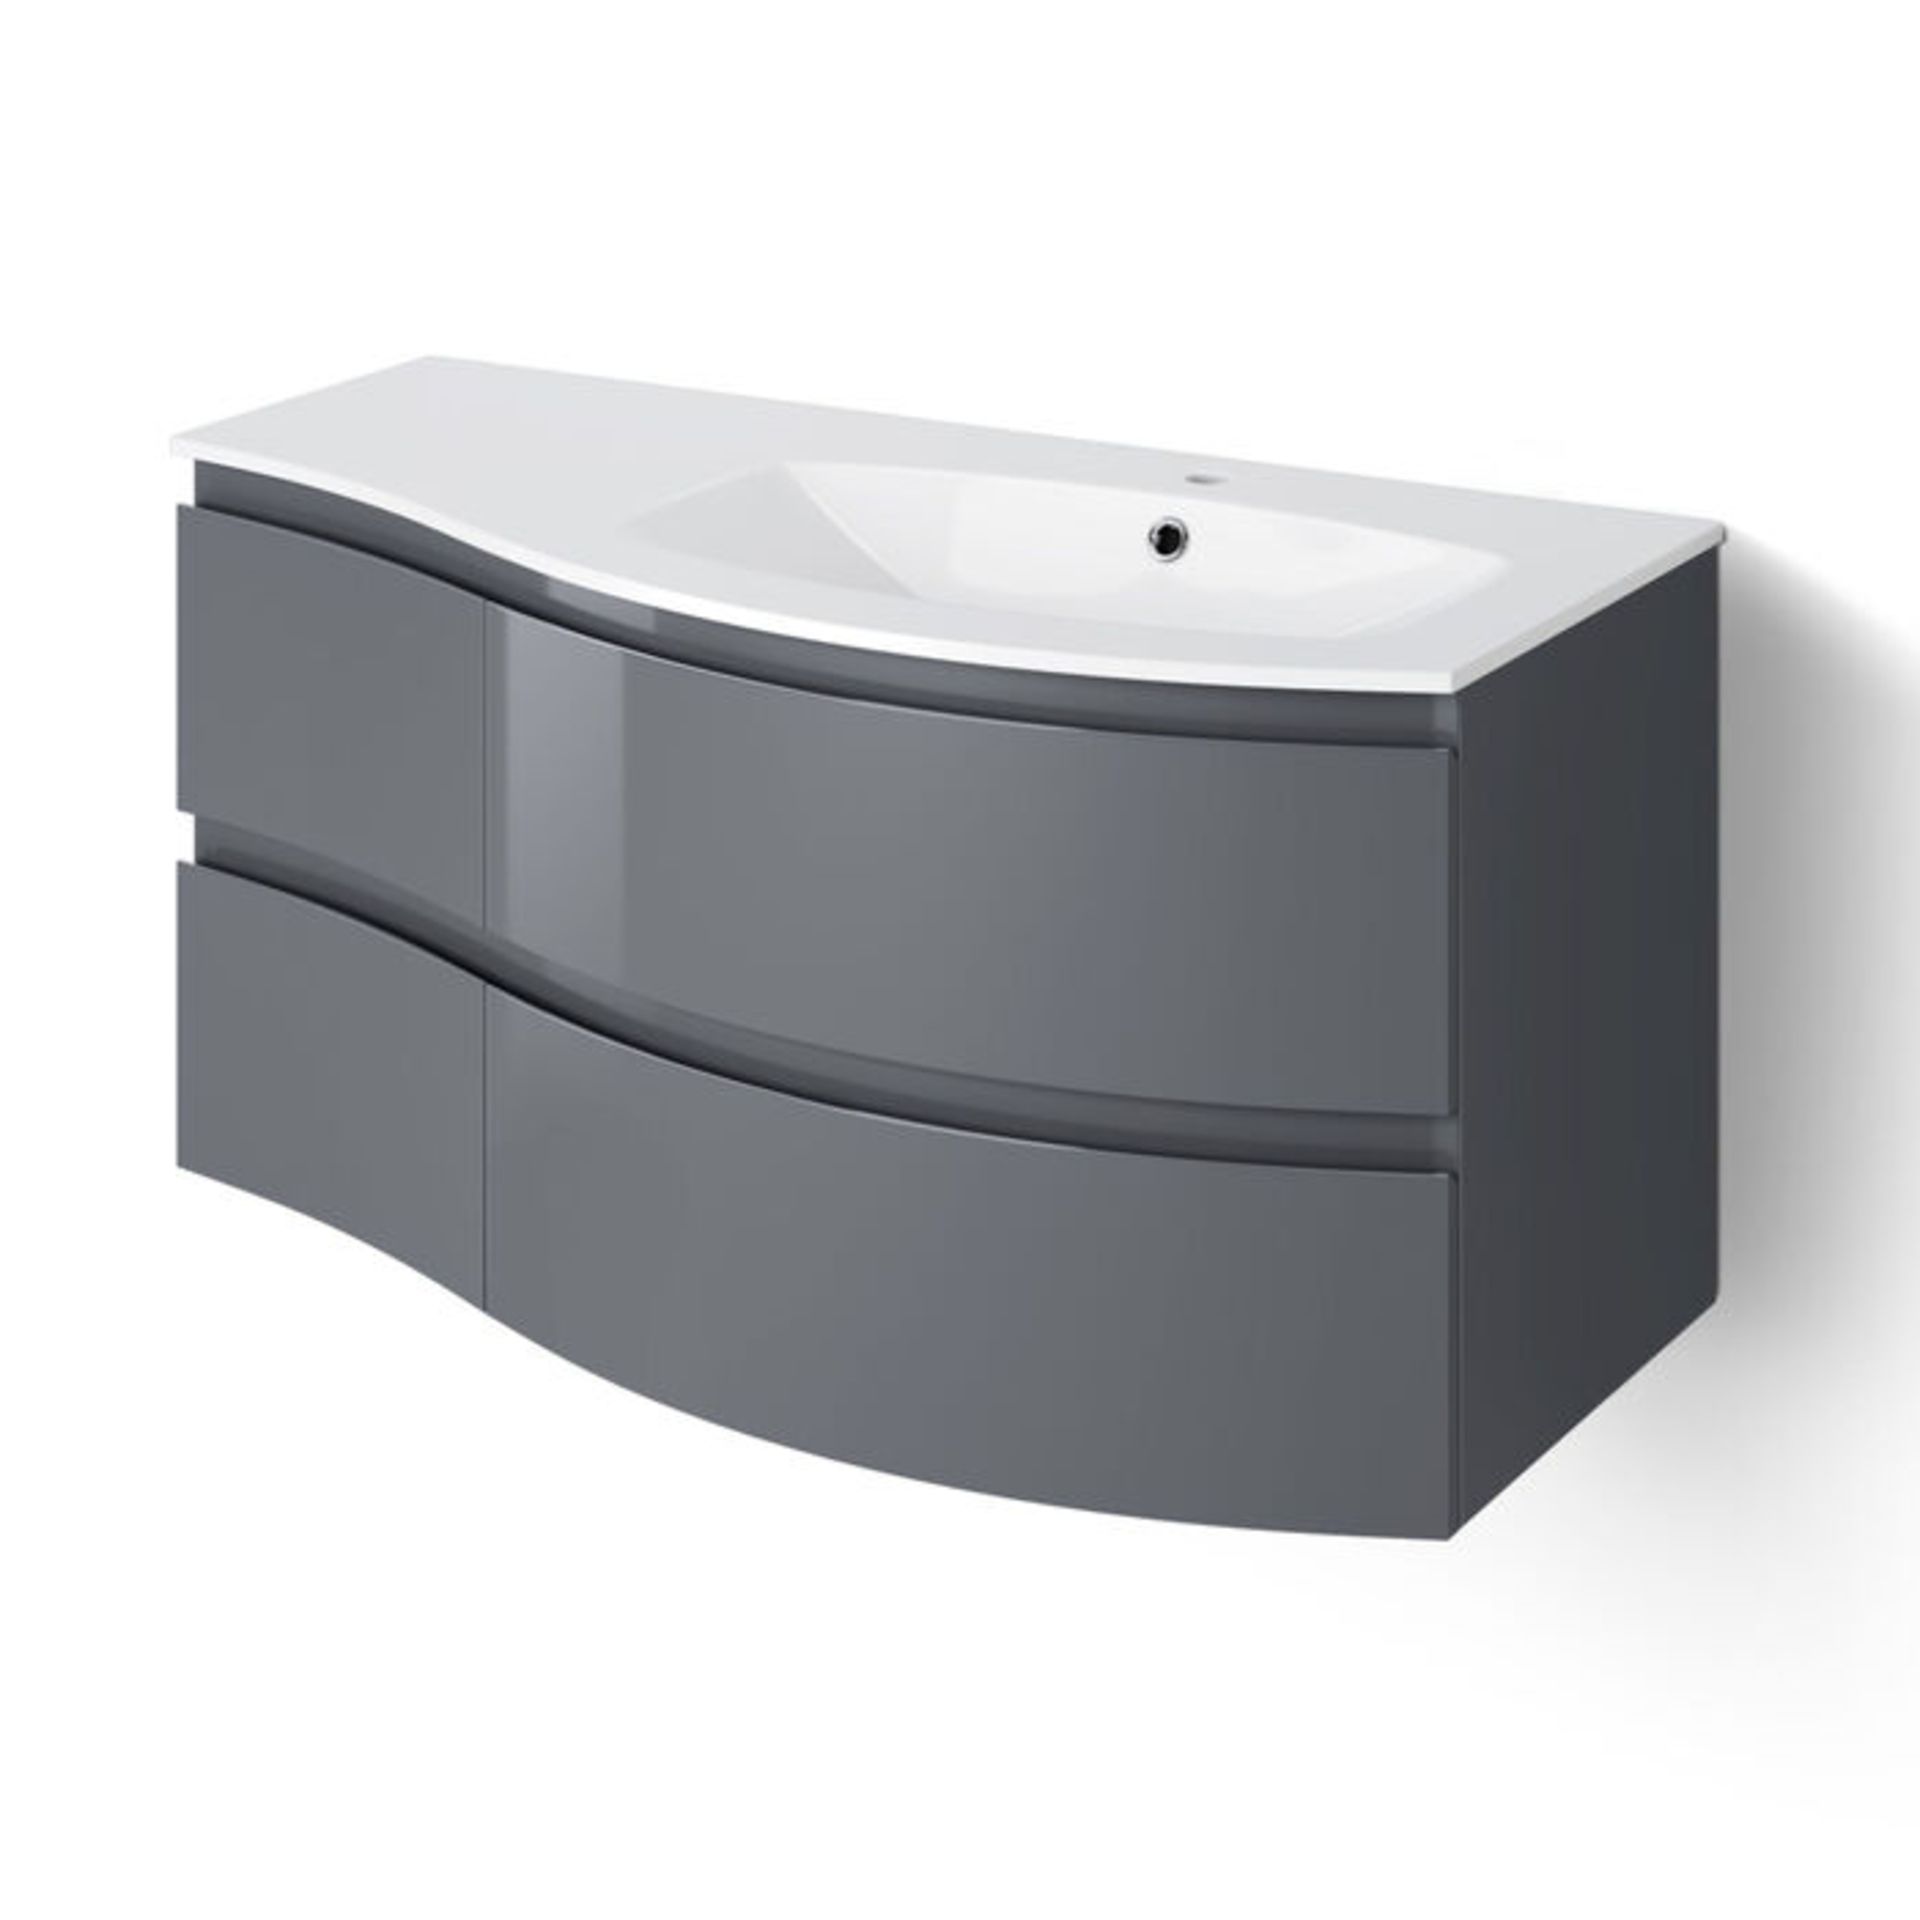 (G5) 1040mm Amelie Gloss Grey Curved Vanity Unit - Right Hand - Wall Hung. Comes complete with ... - Image 3 of 5